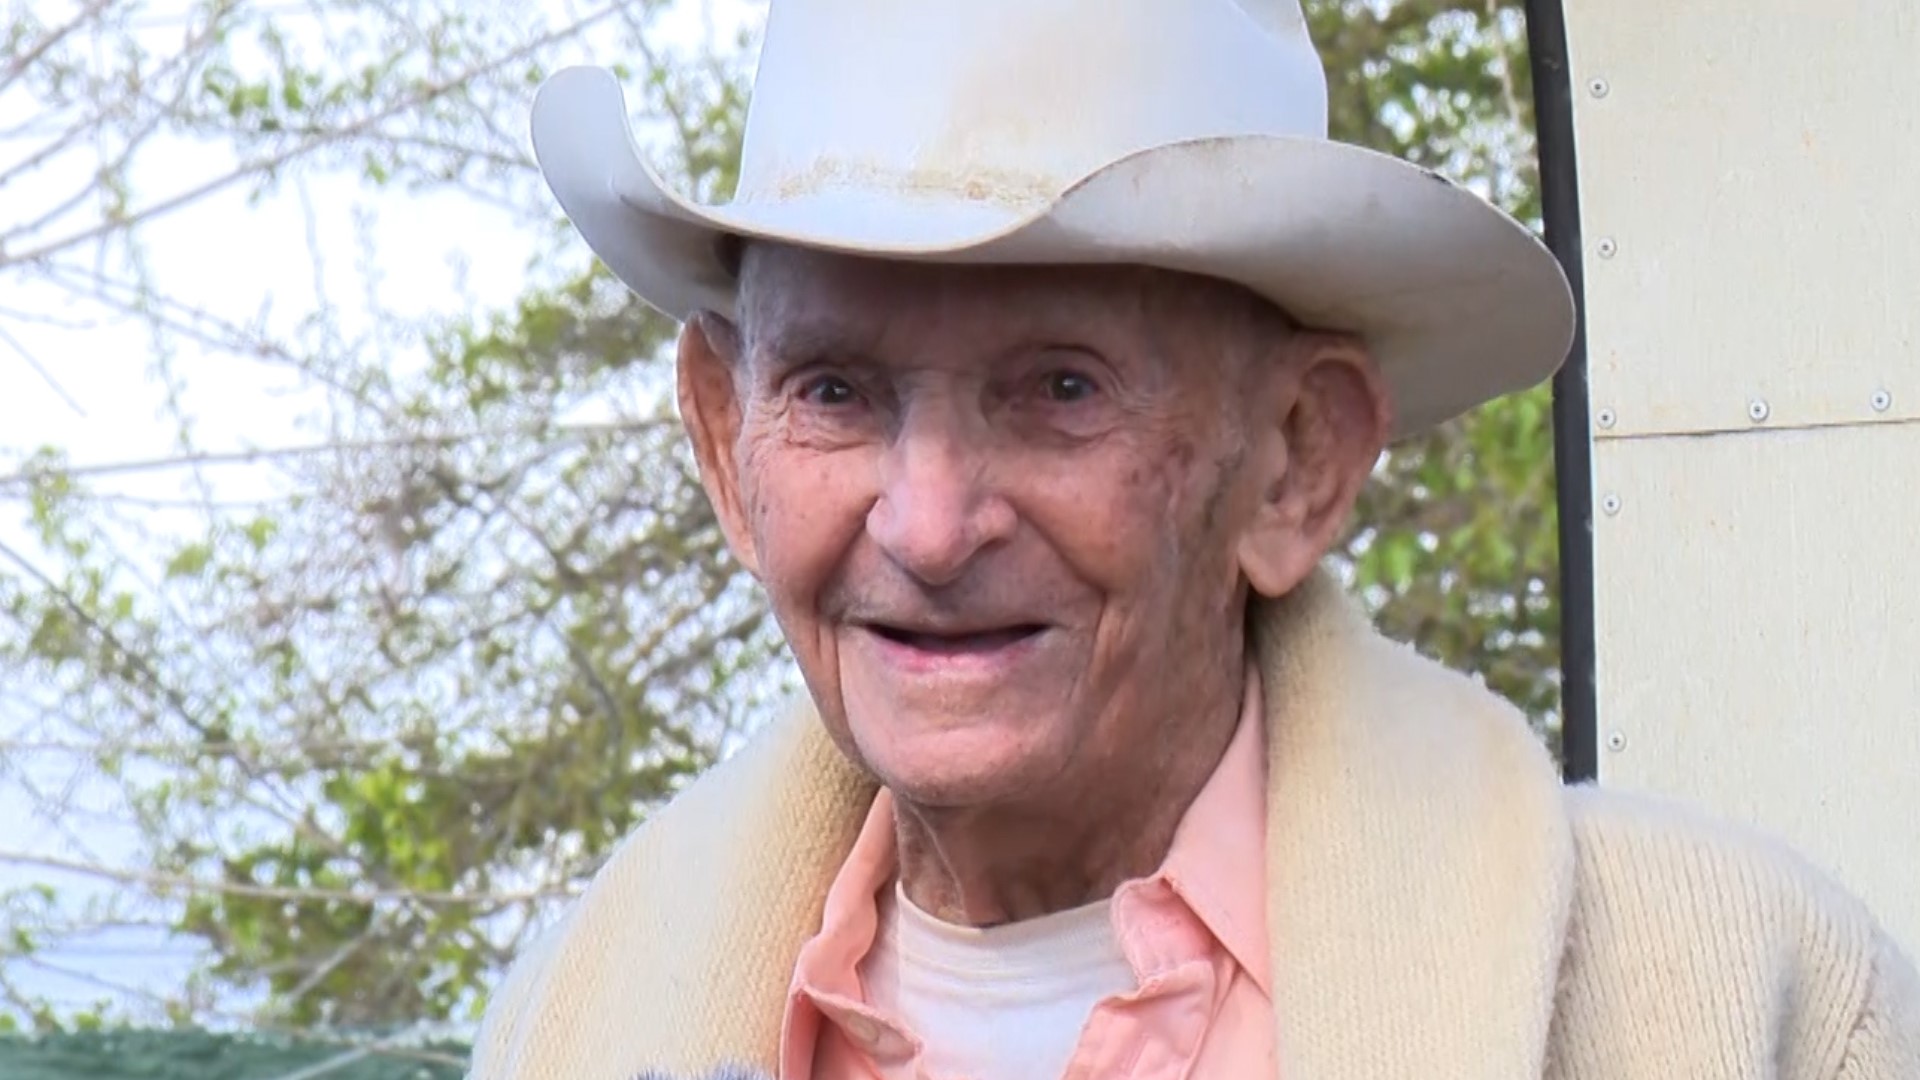 106 year old Curley Bunfill says he's not worried about coronavirus, not with all he's lived through. It includes the 1918 flu pandemic, Great Depression, and WWII.